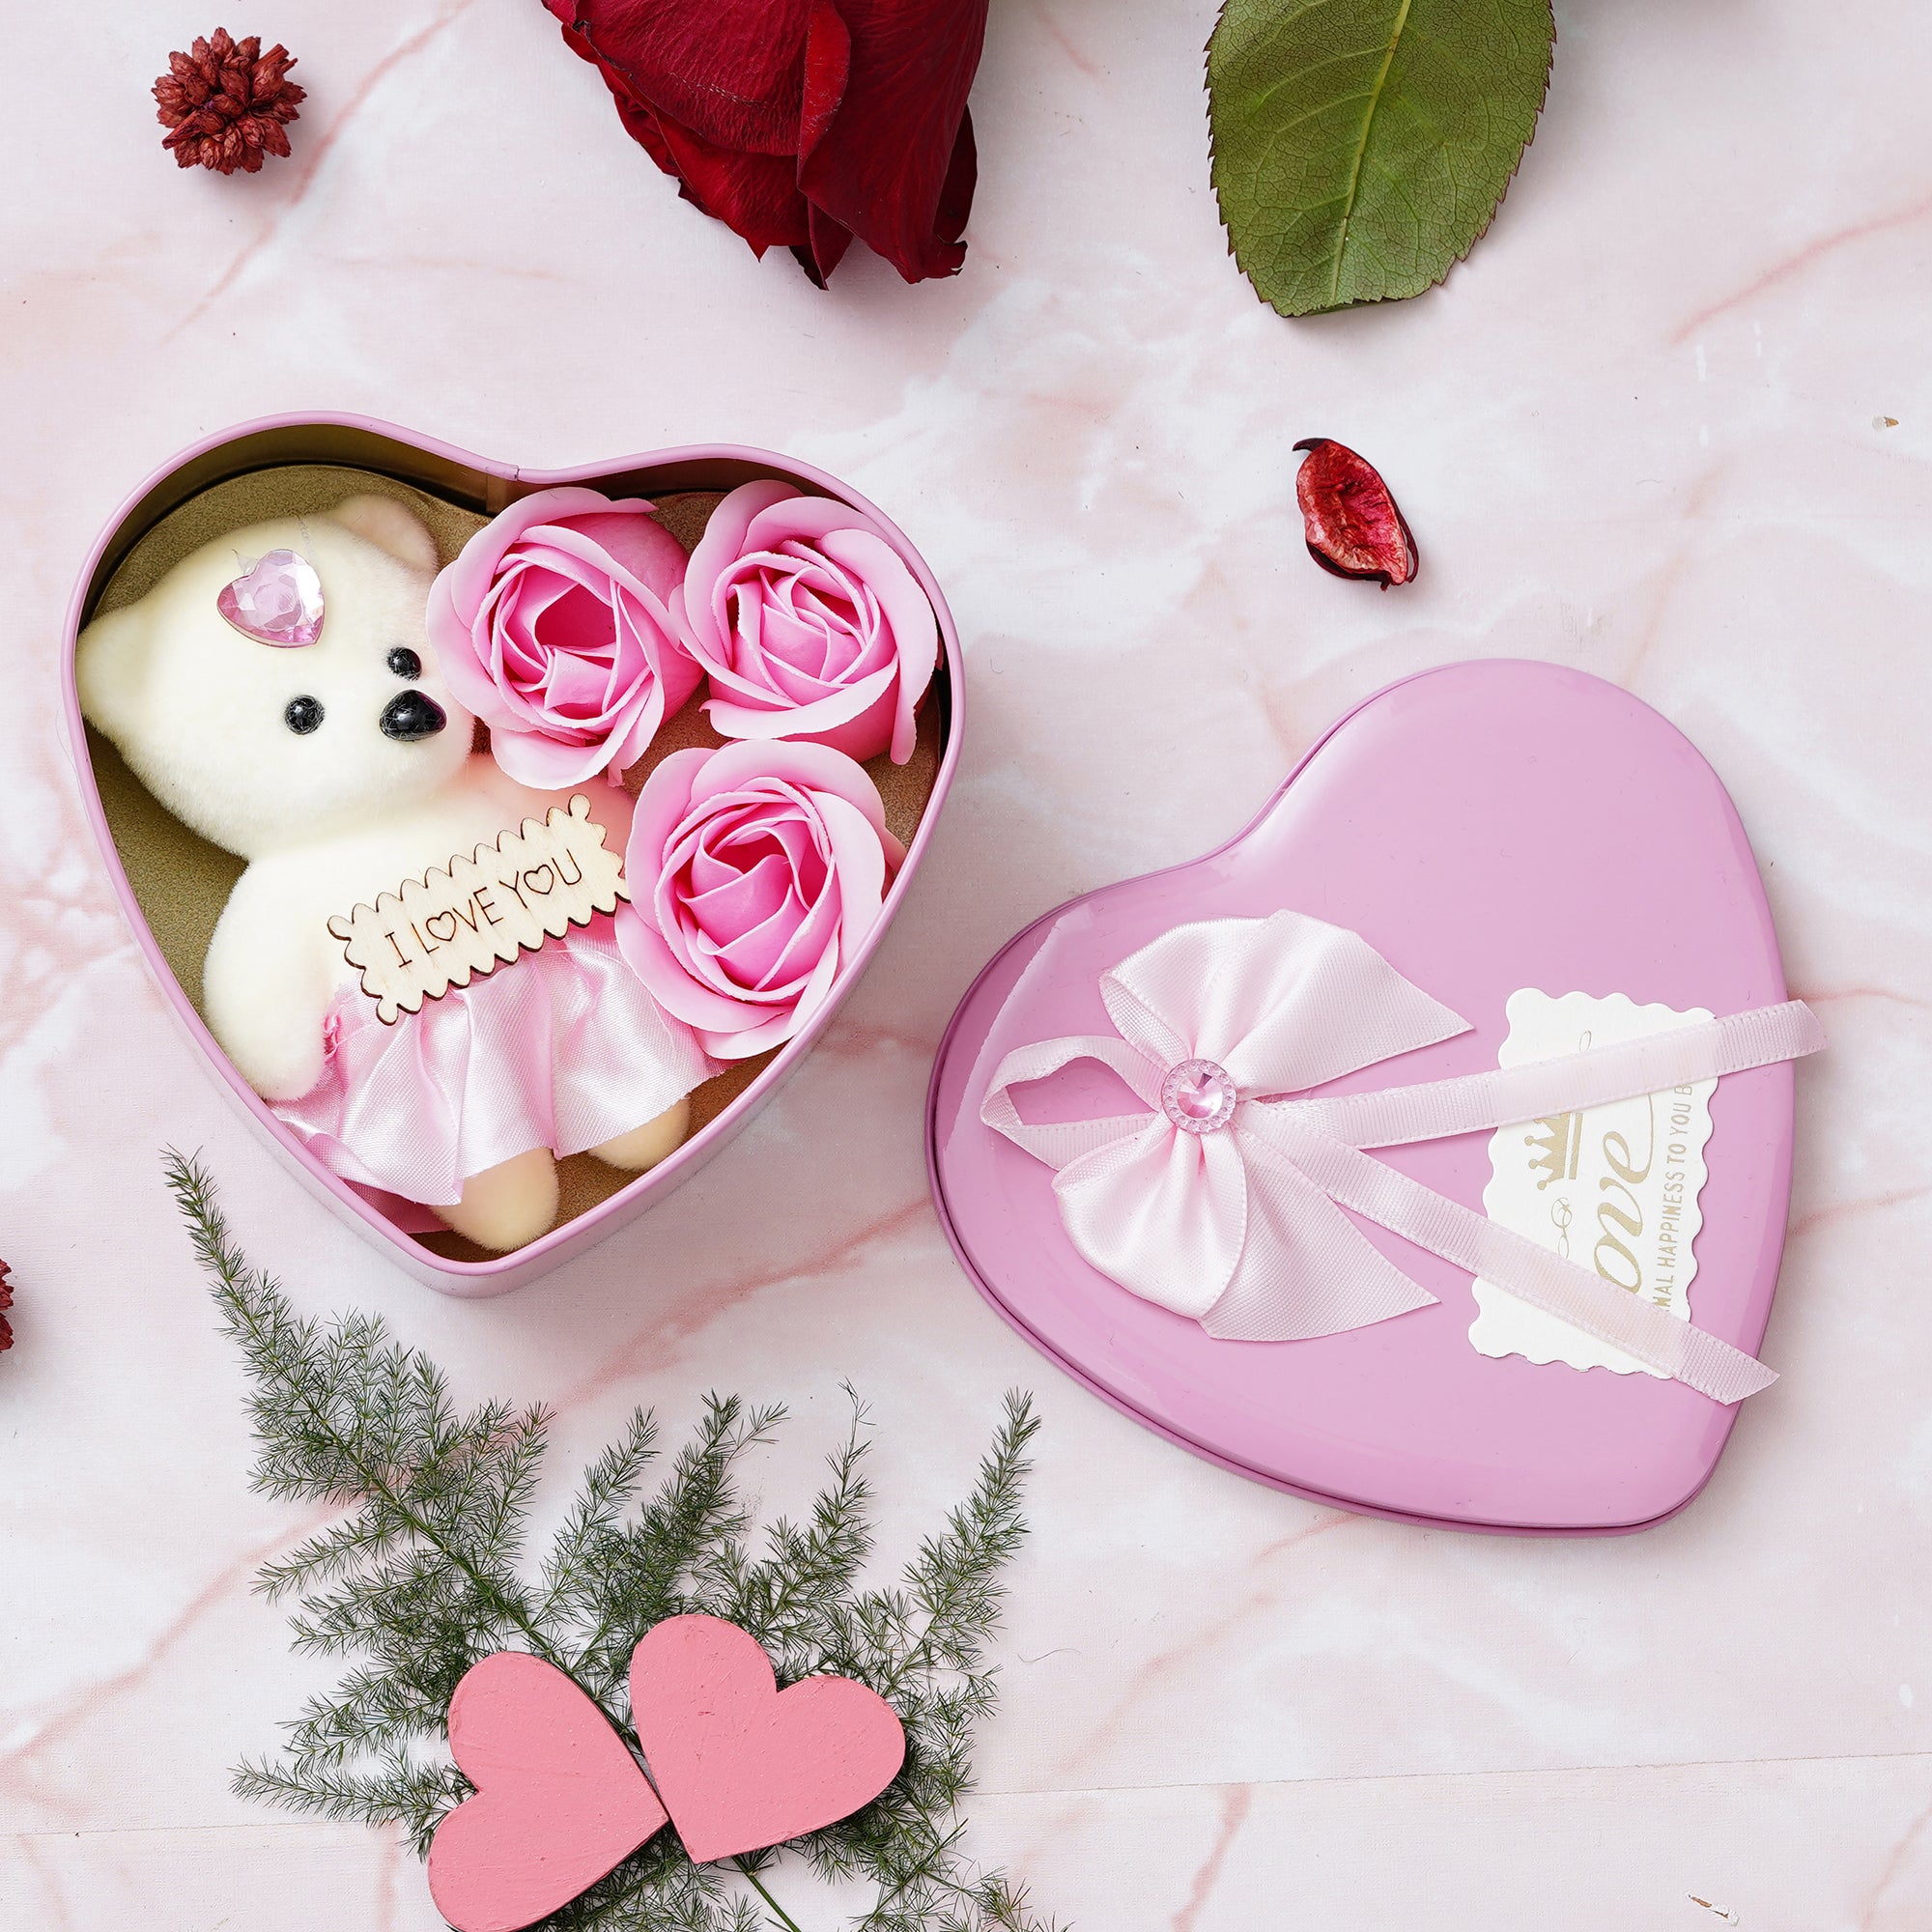 Valentine Combo of Card, "20 Reasons Why I Love You" Printed on Little Hearts Wooden Gift Set, Pink Heart Shaped Gift Box with Teddy and Roses 5